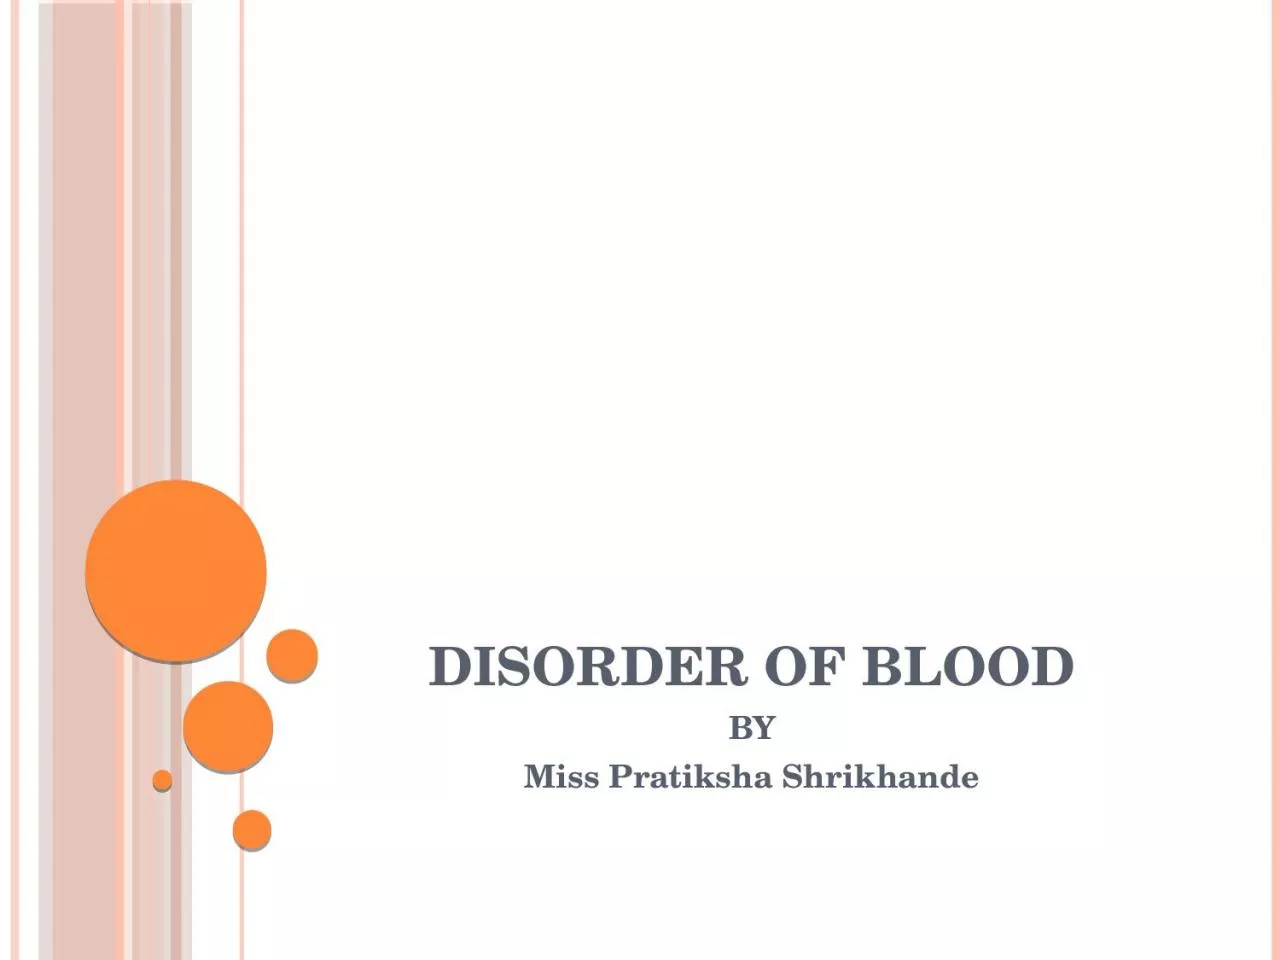 Disorder of blood BY Miss